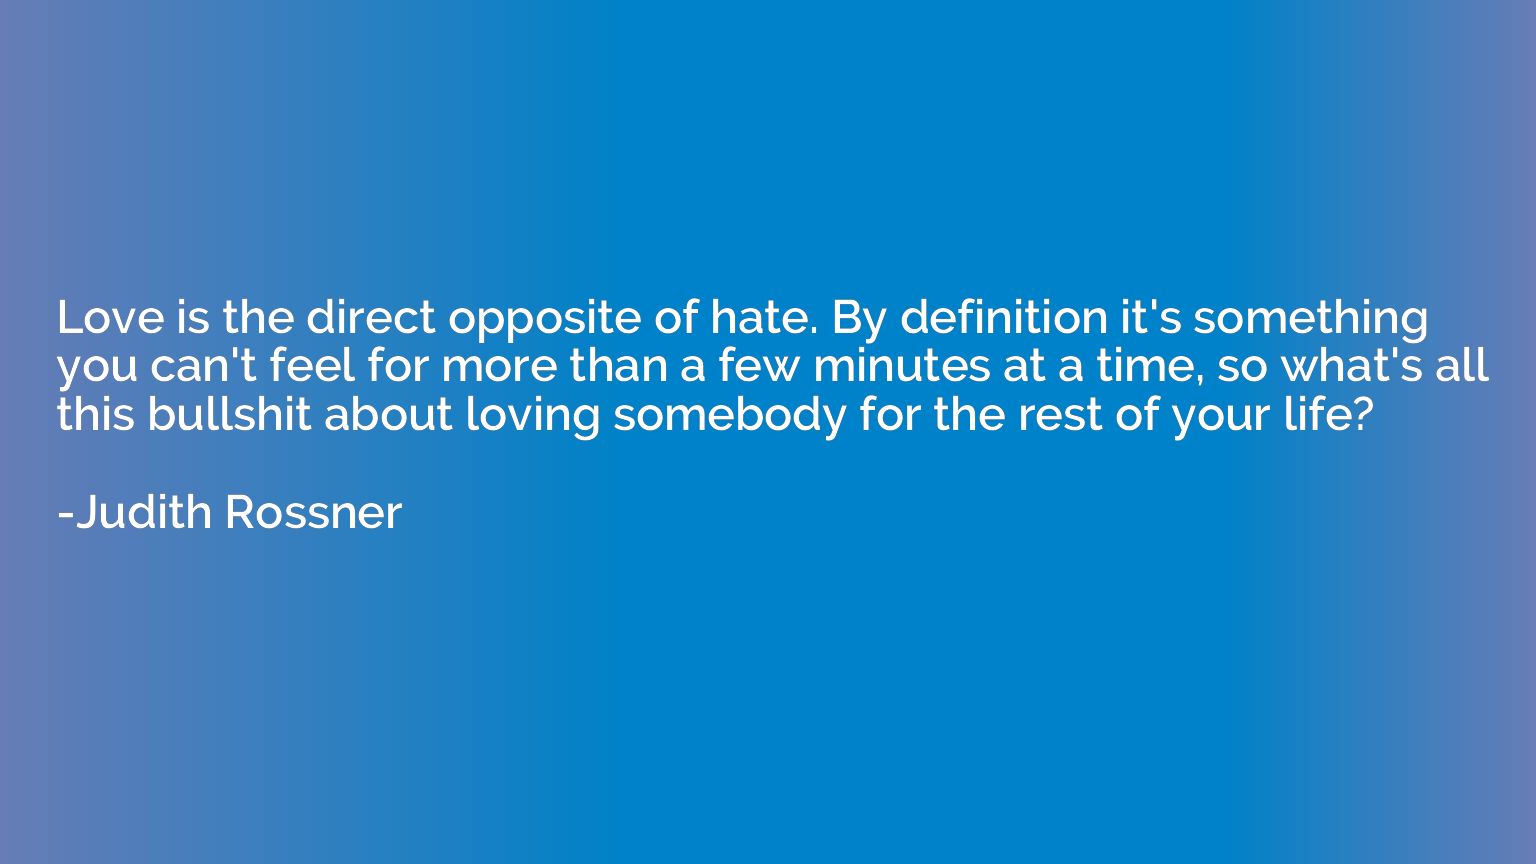 Love is the direct opposite of hate. By definition it's some